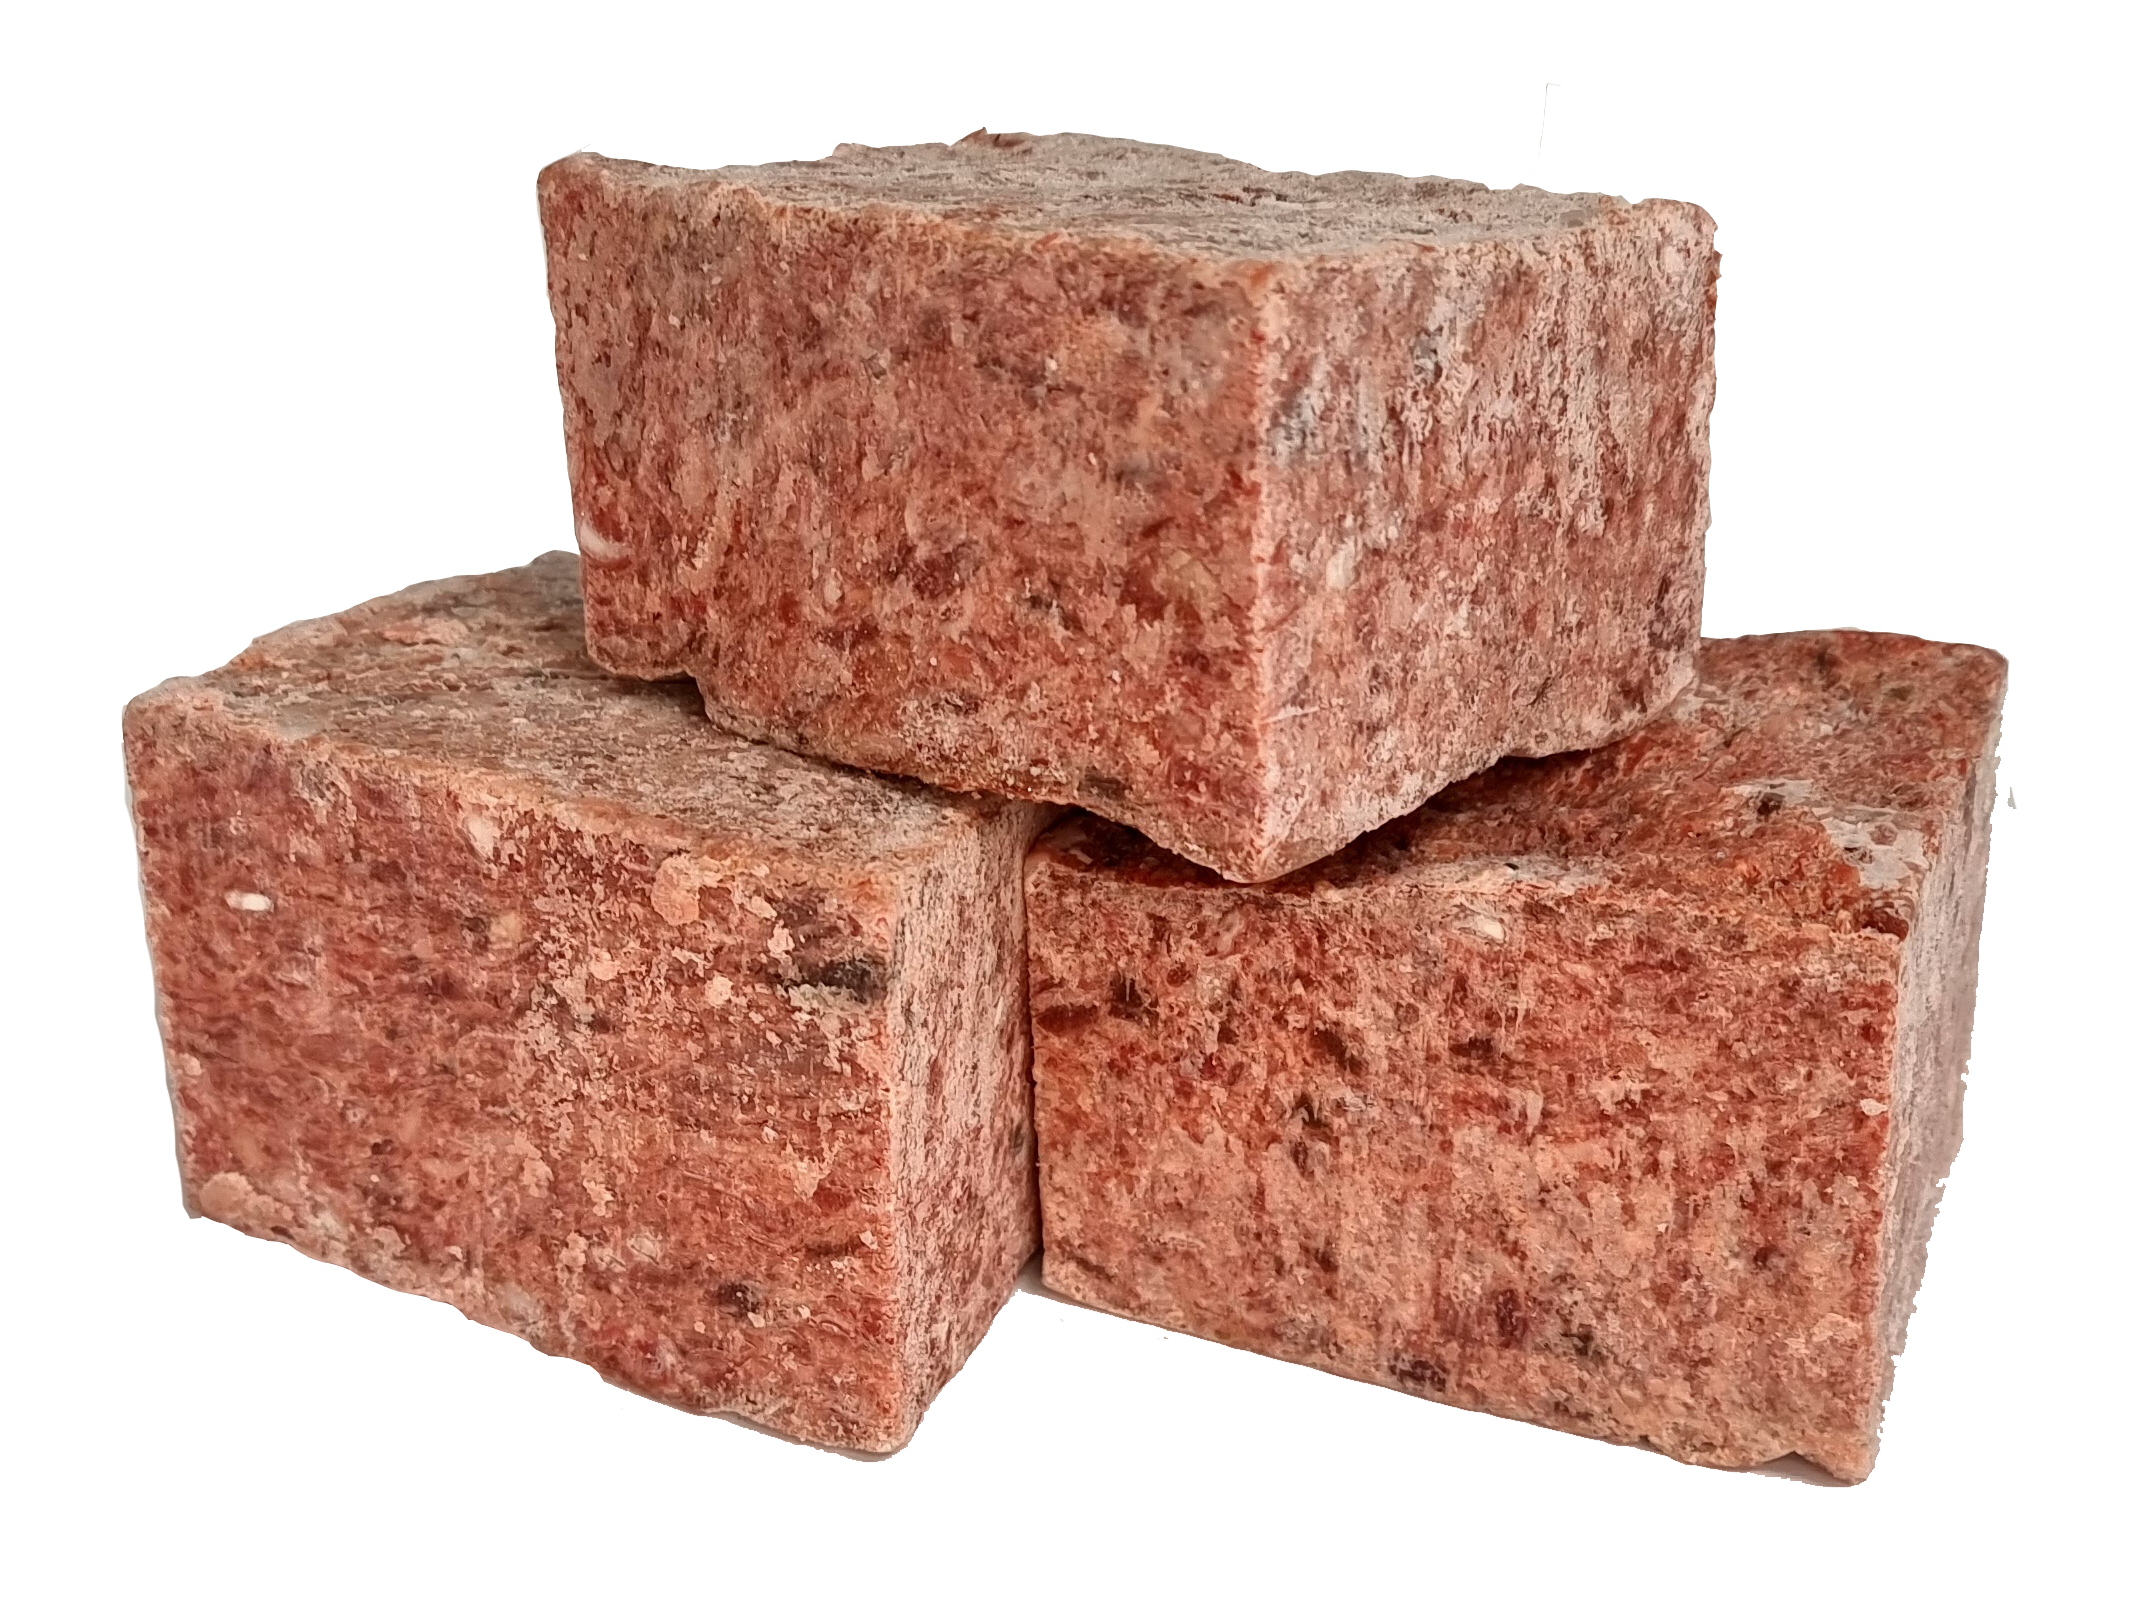 Beef & Chicken COMPLETE 5kgs (11lb) 12 x Small Blocks - Working Dog